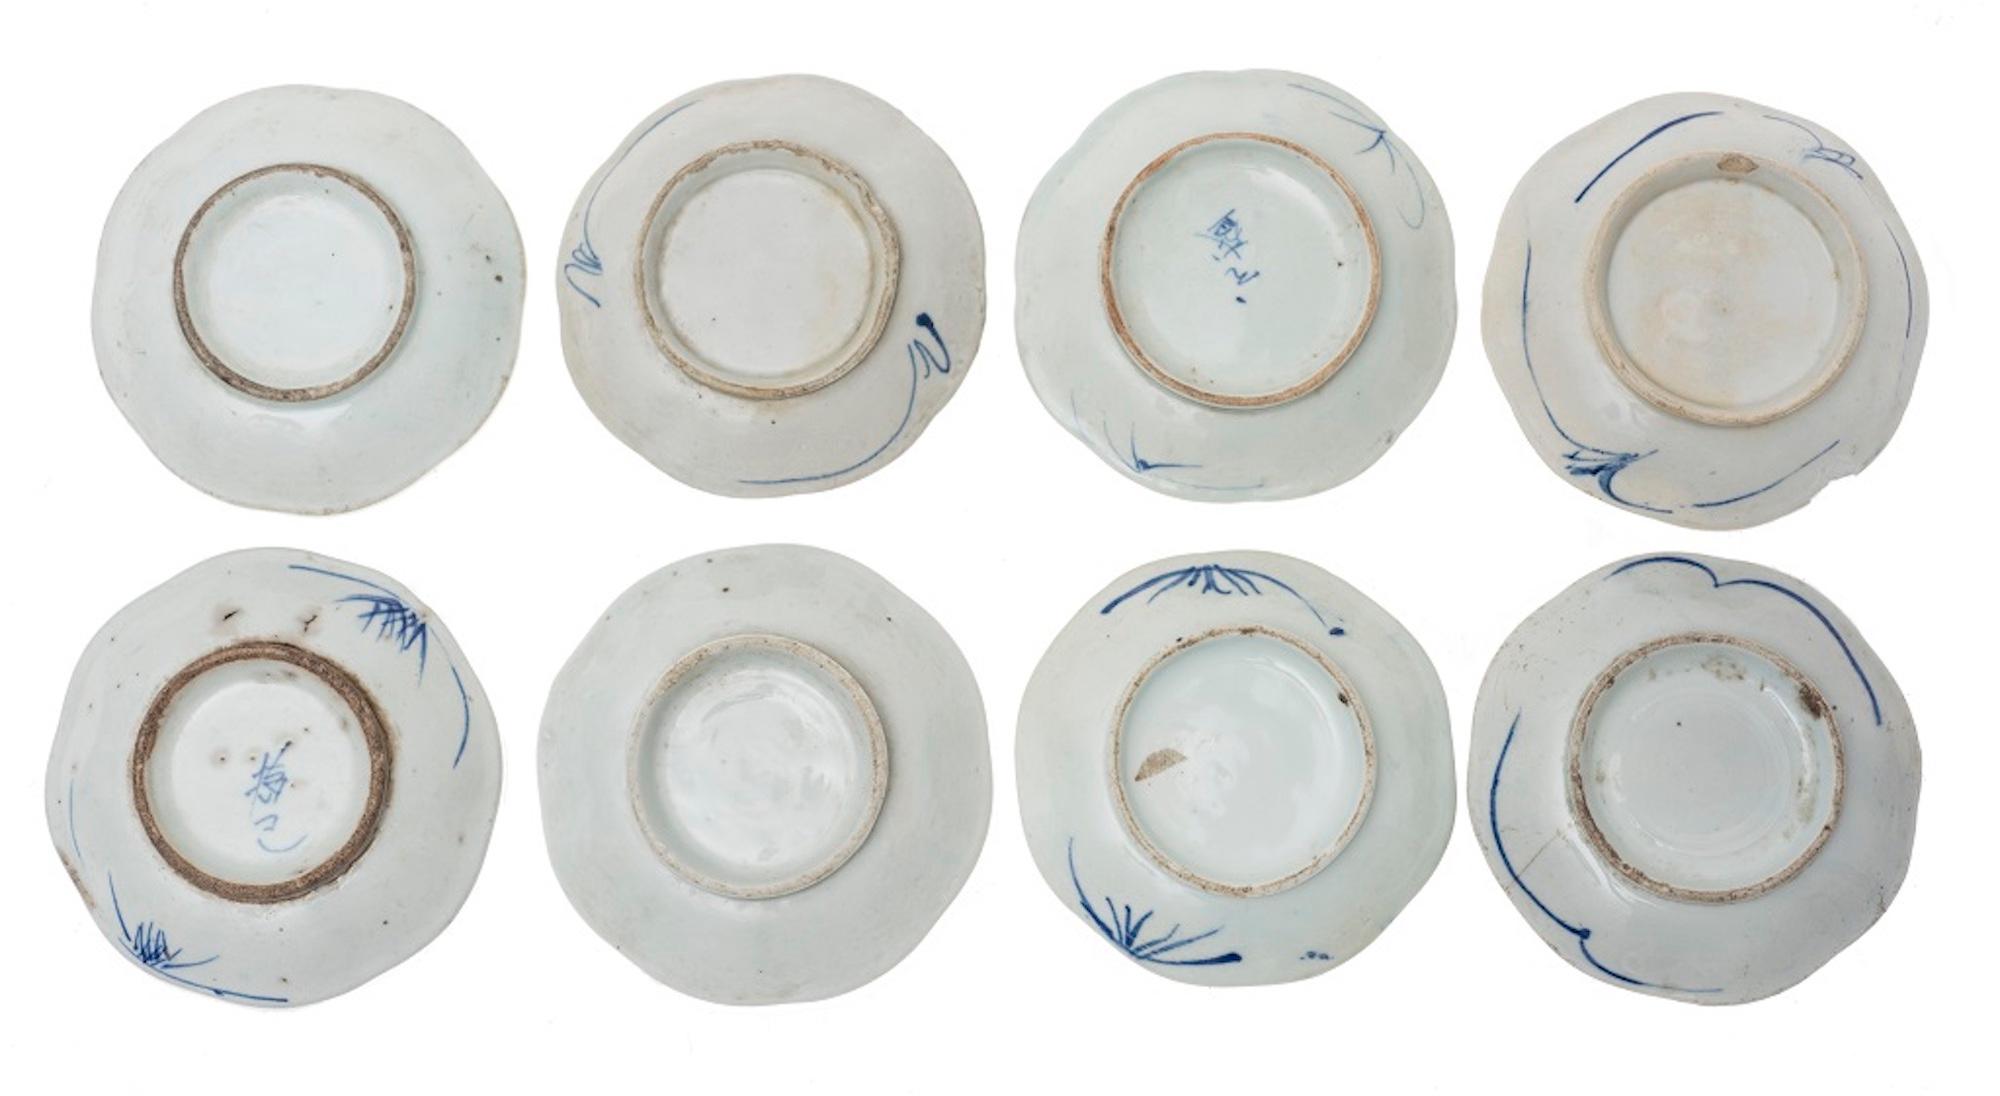 Chinese bowls is an original decorative object realized by an anonymous Chinese designer between 17th-19th century.

These beautiful object are decorated with blue and white decor initialed in Chinese paste characters inside.

Good